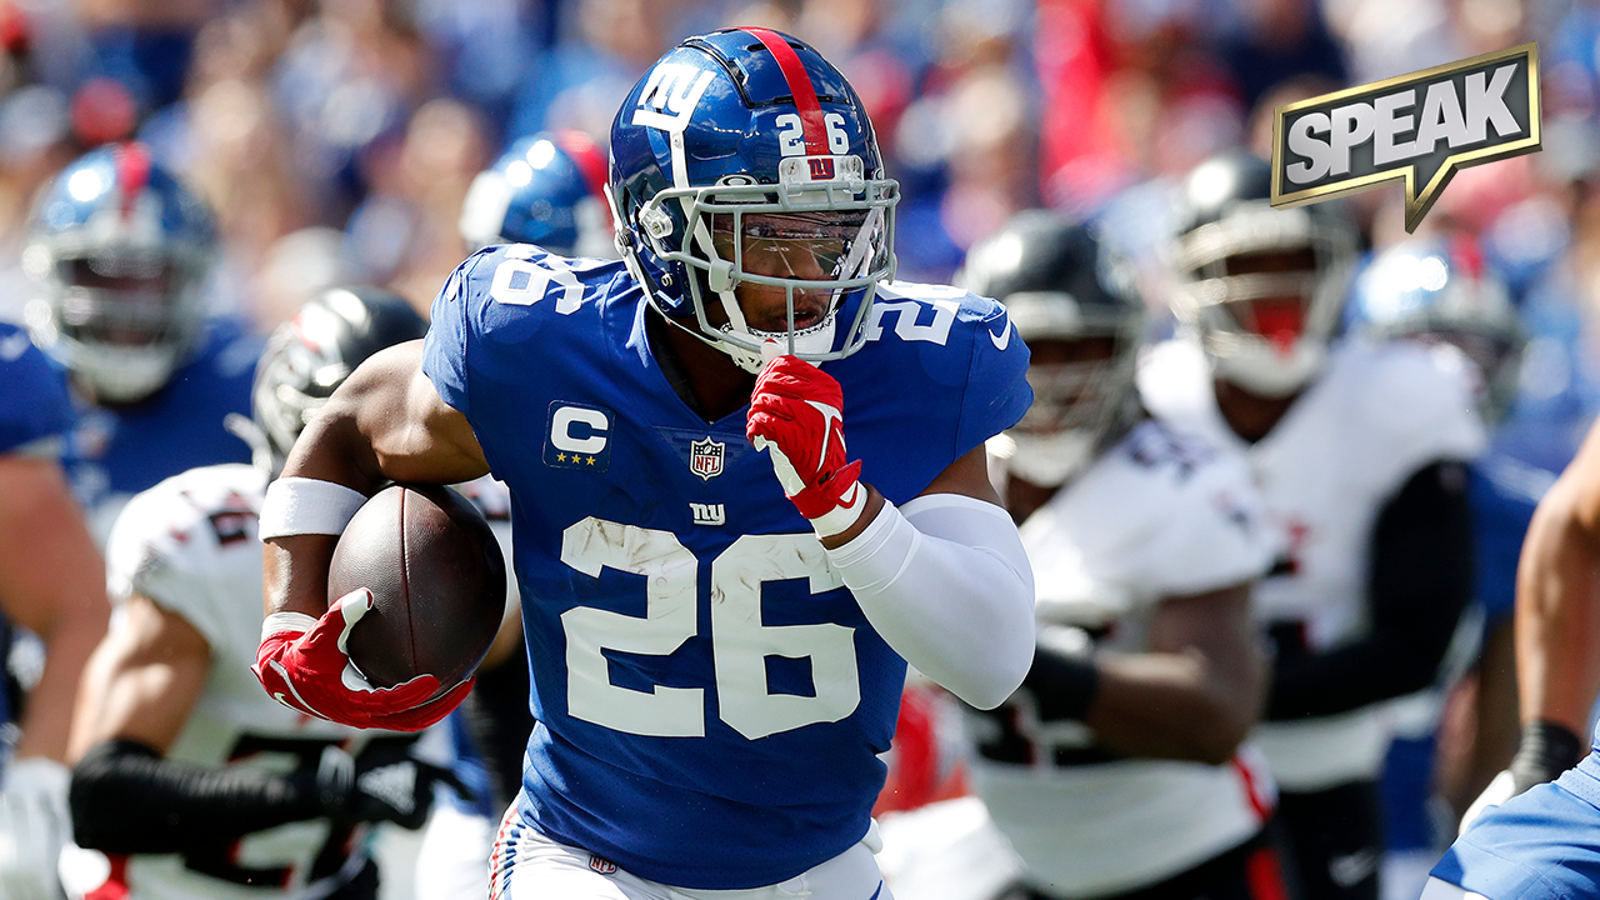 Should Saquon Barkley sit out rather than play on franchise tag? 